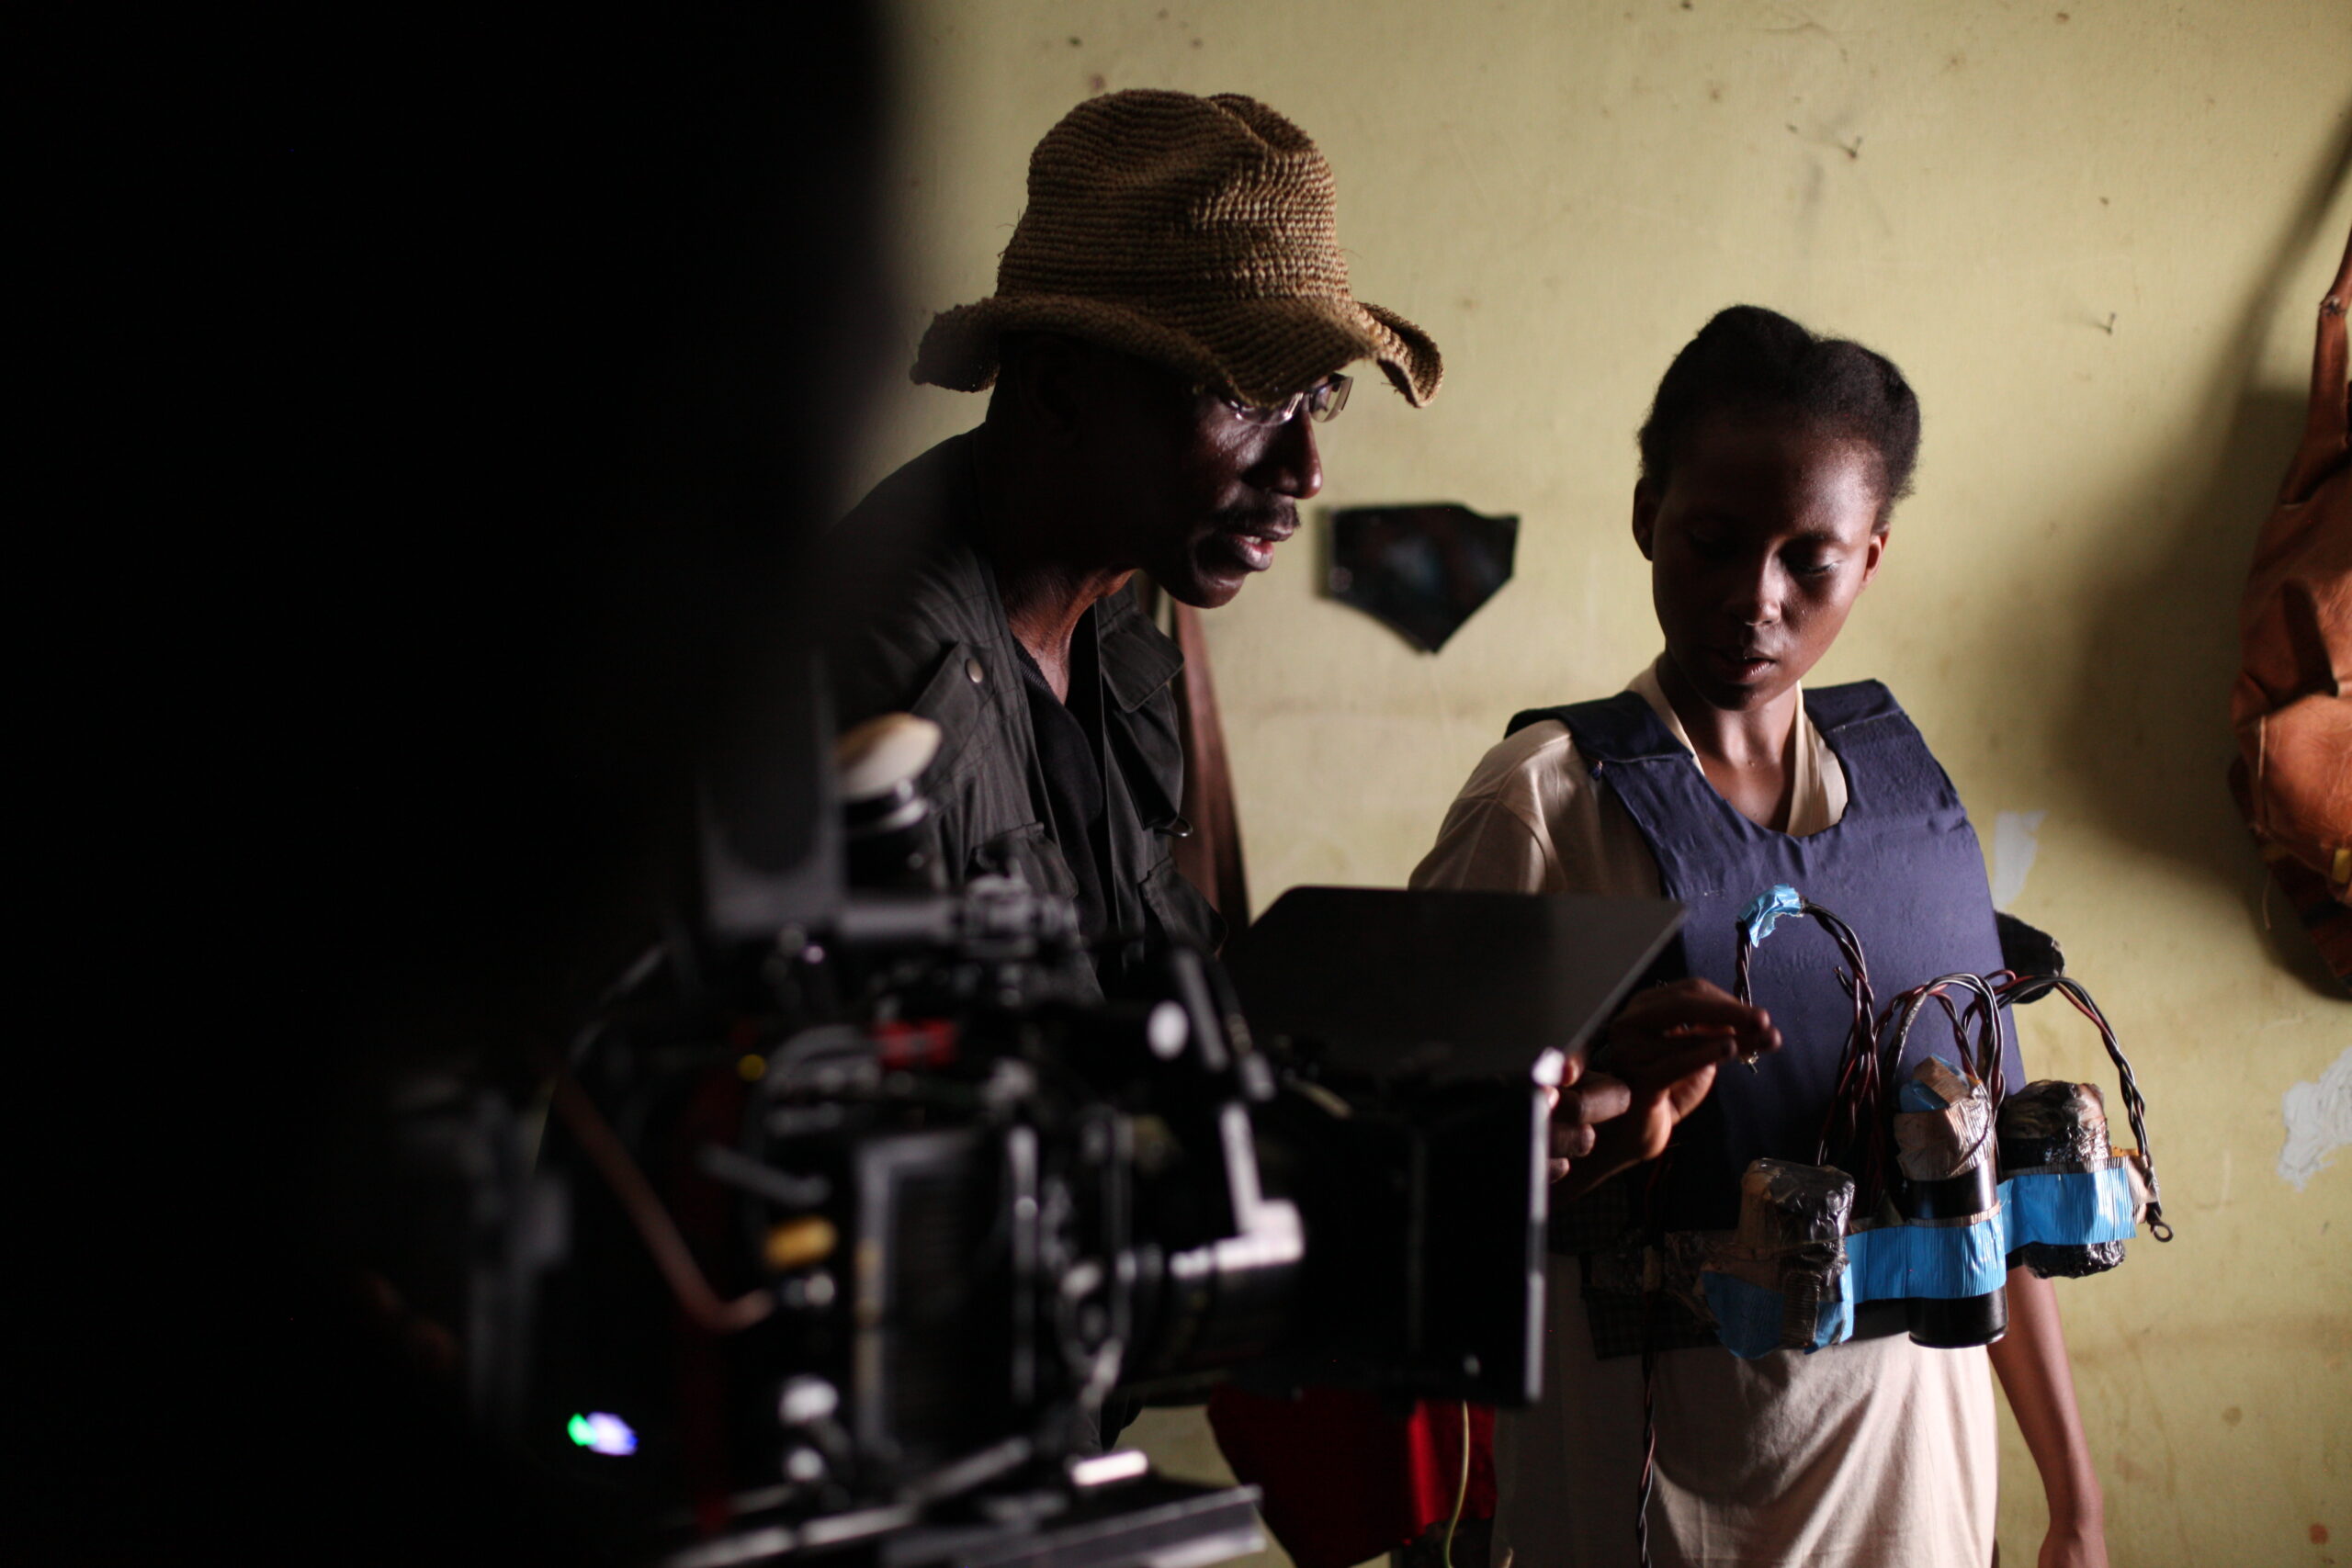 IMG 9999 scaled - Desmond Ovbiagele On The Making of An Oscar Worthy Picture “The Milkmaid”